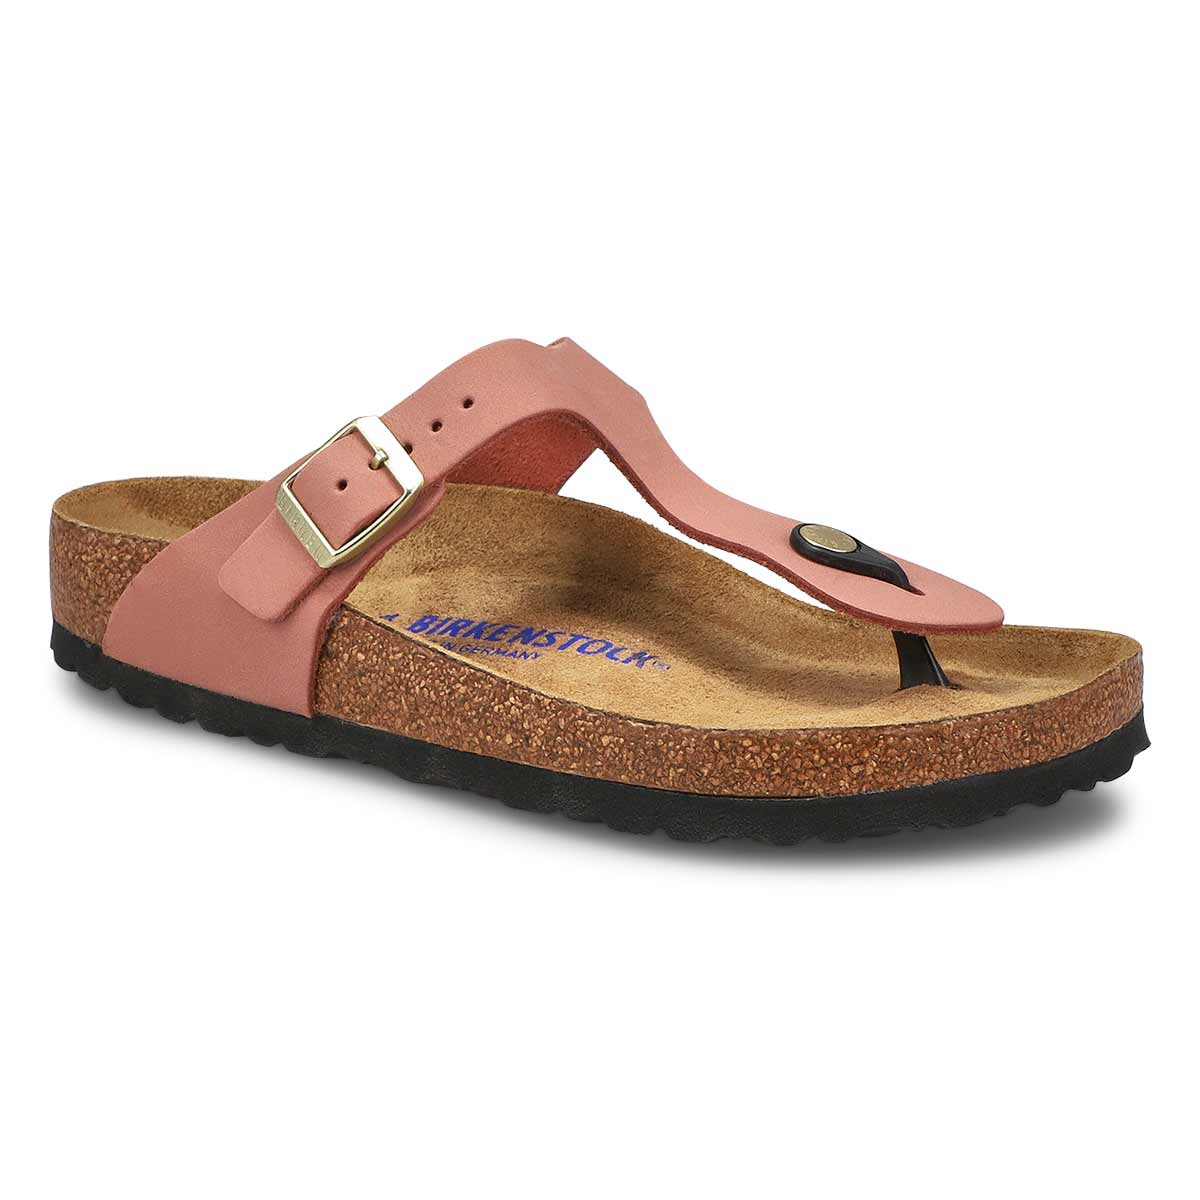 Birkenstock Gizeh Braided Leather Thong Sandal - 20202761